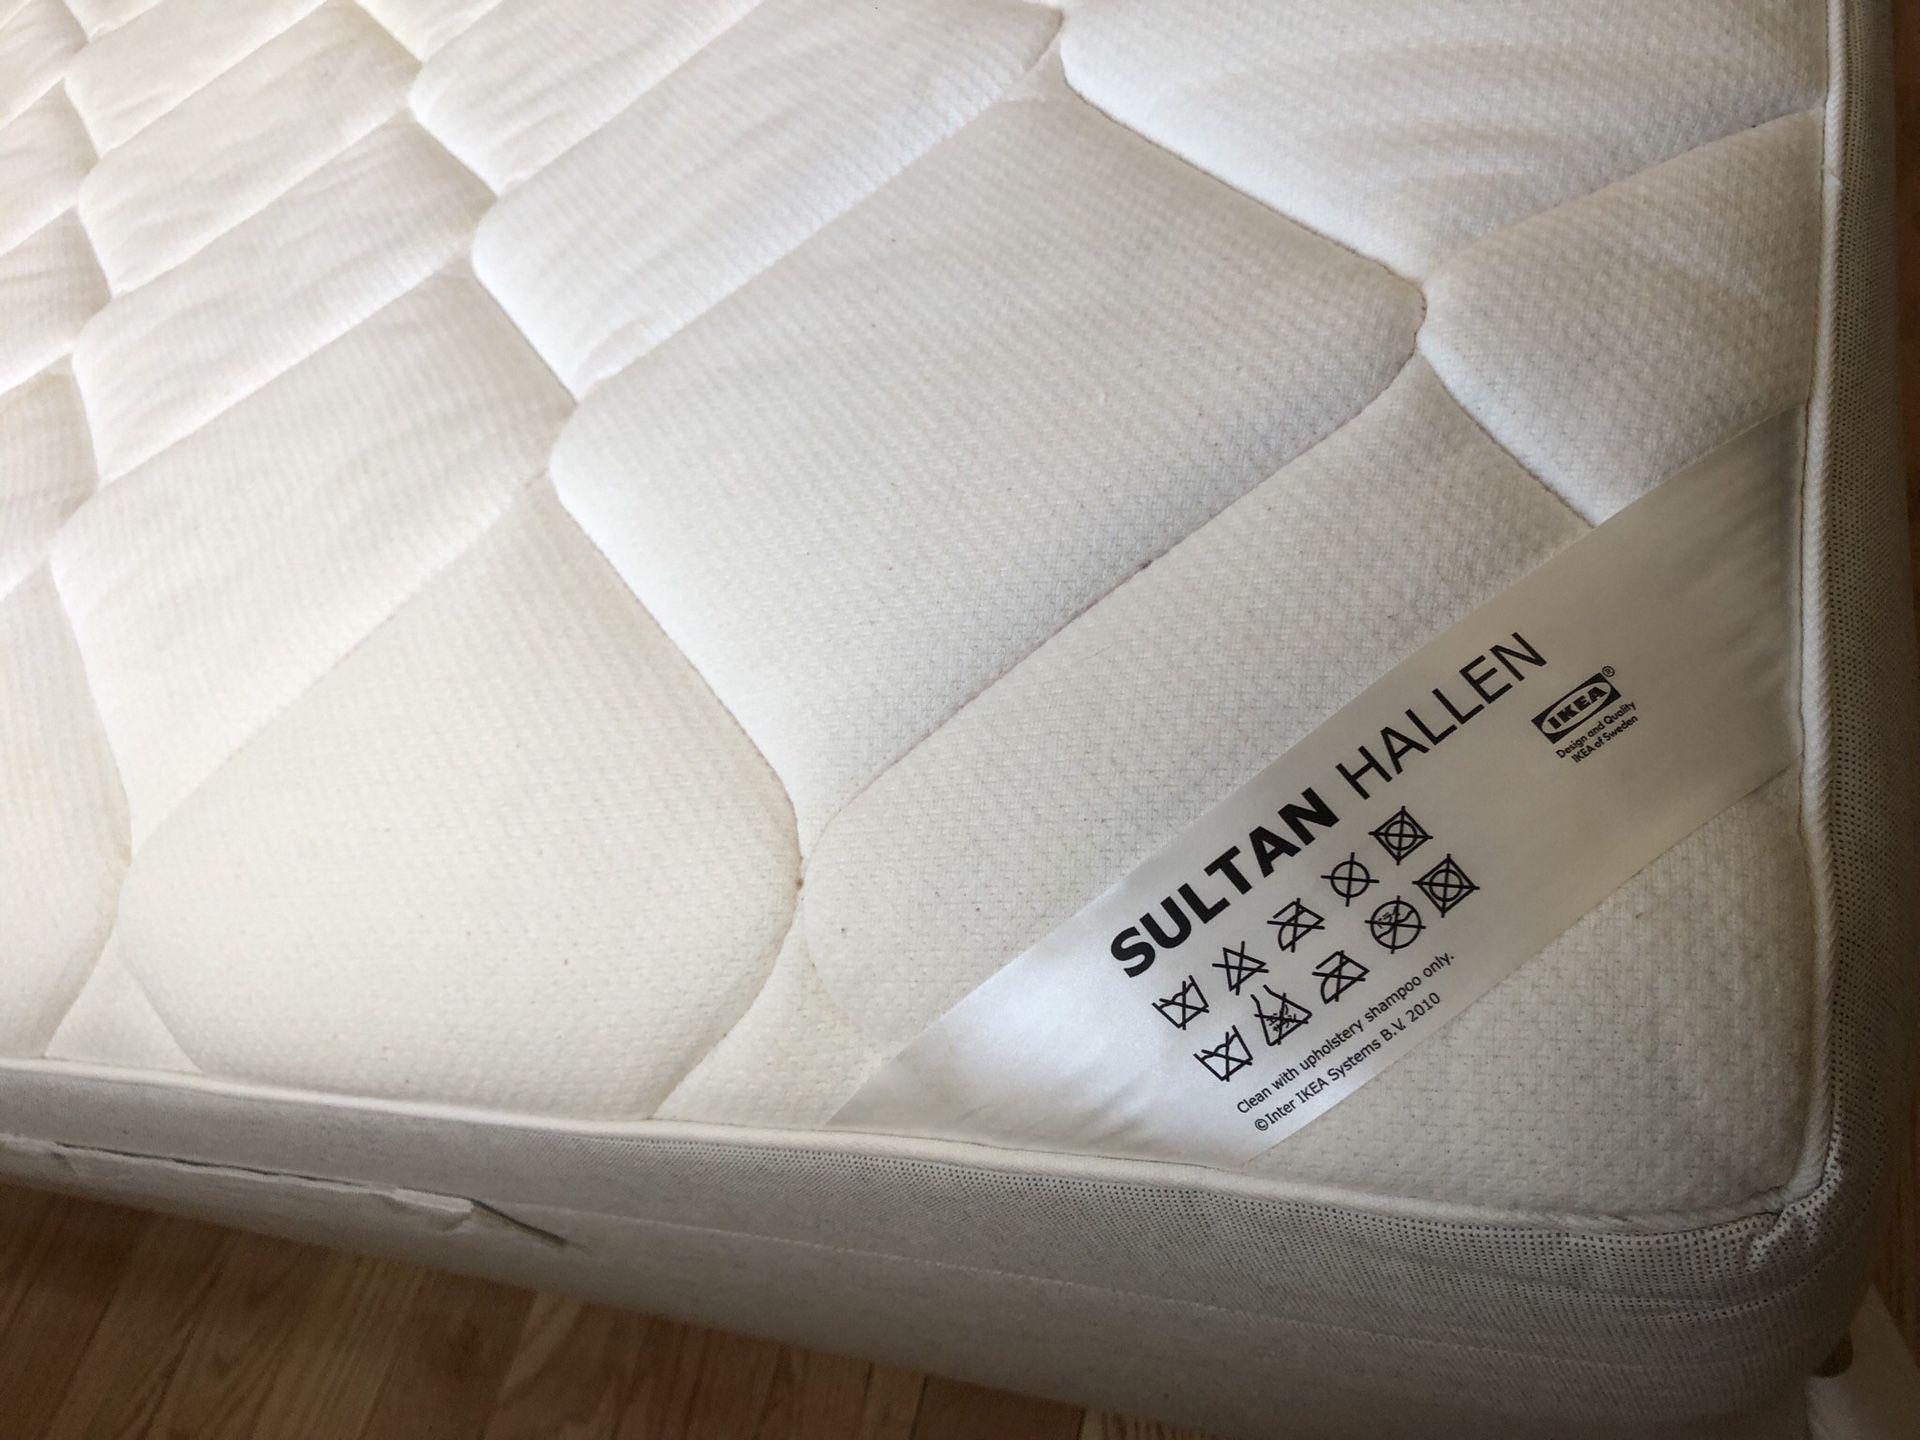 King Size Mattress with Cover and Box Springs